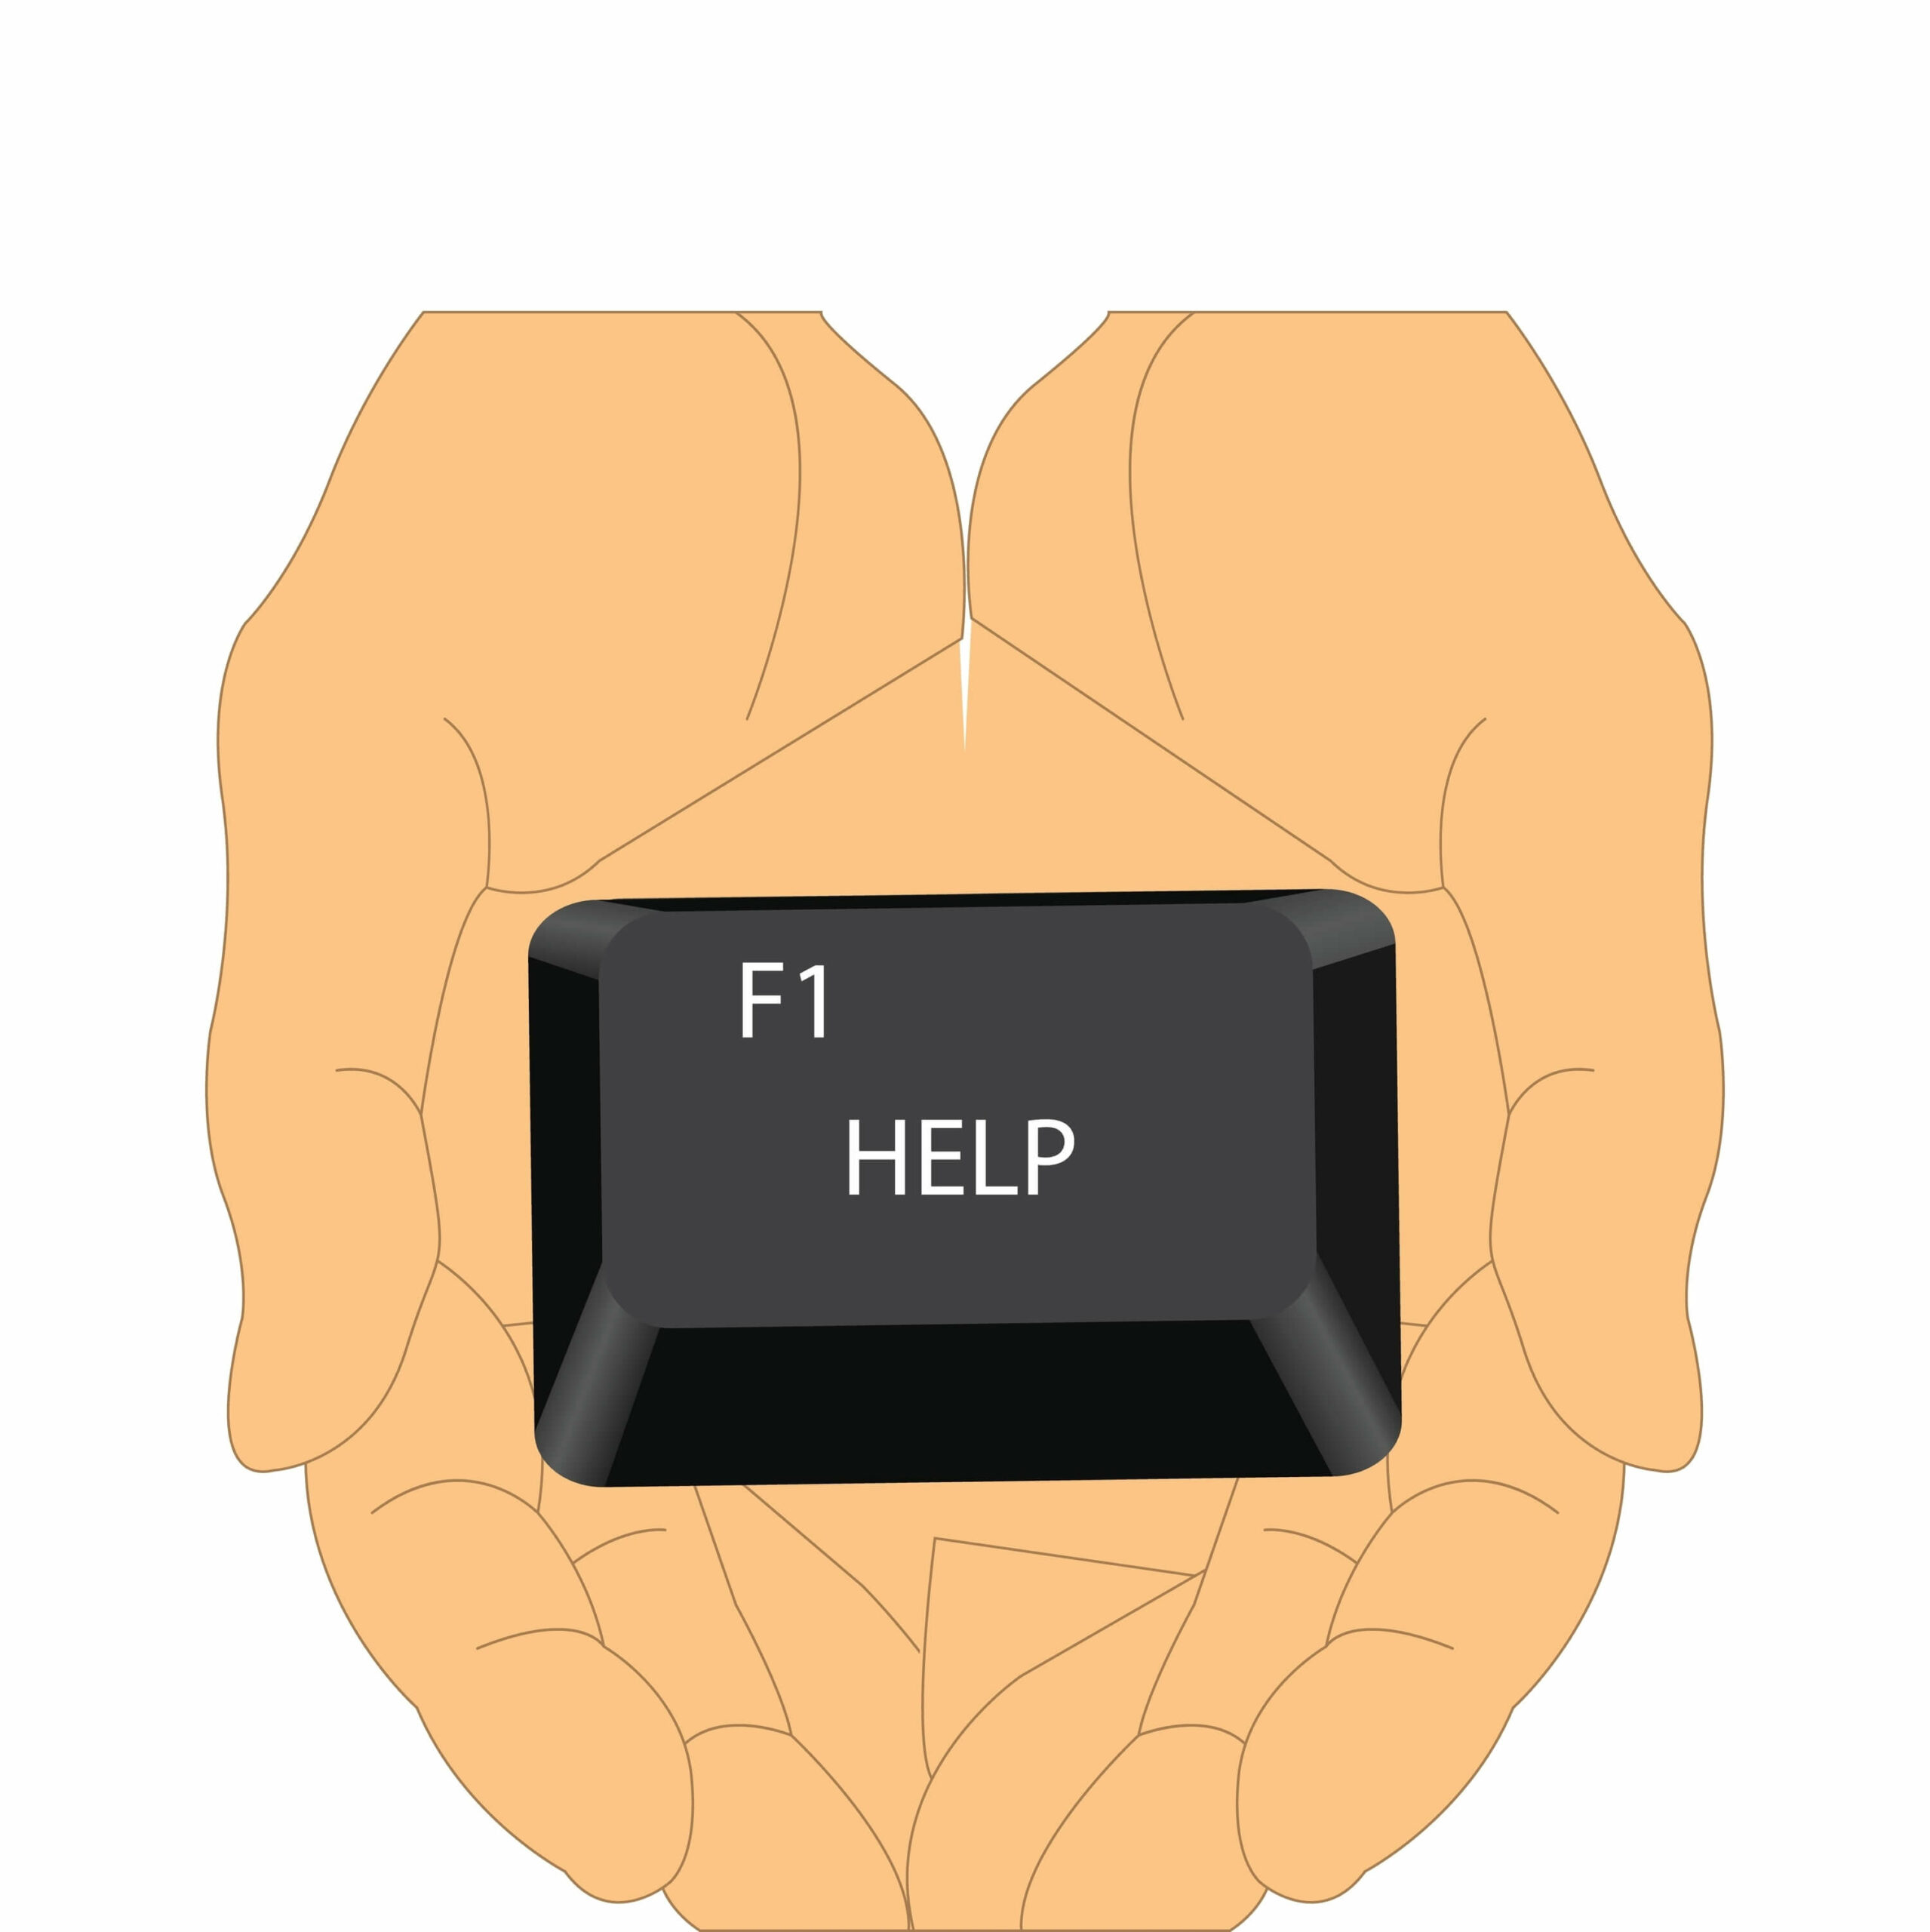 How to Disable the F1 “Help” Key on Windows 10?